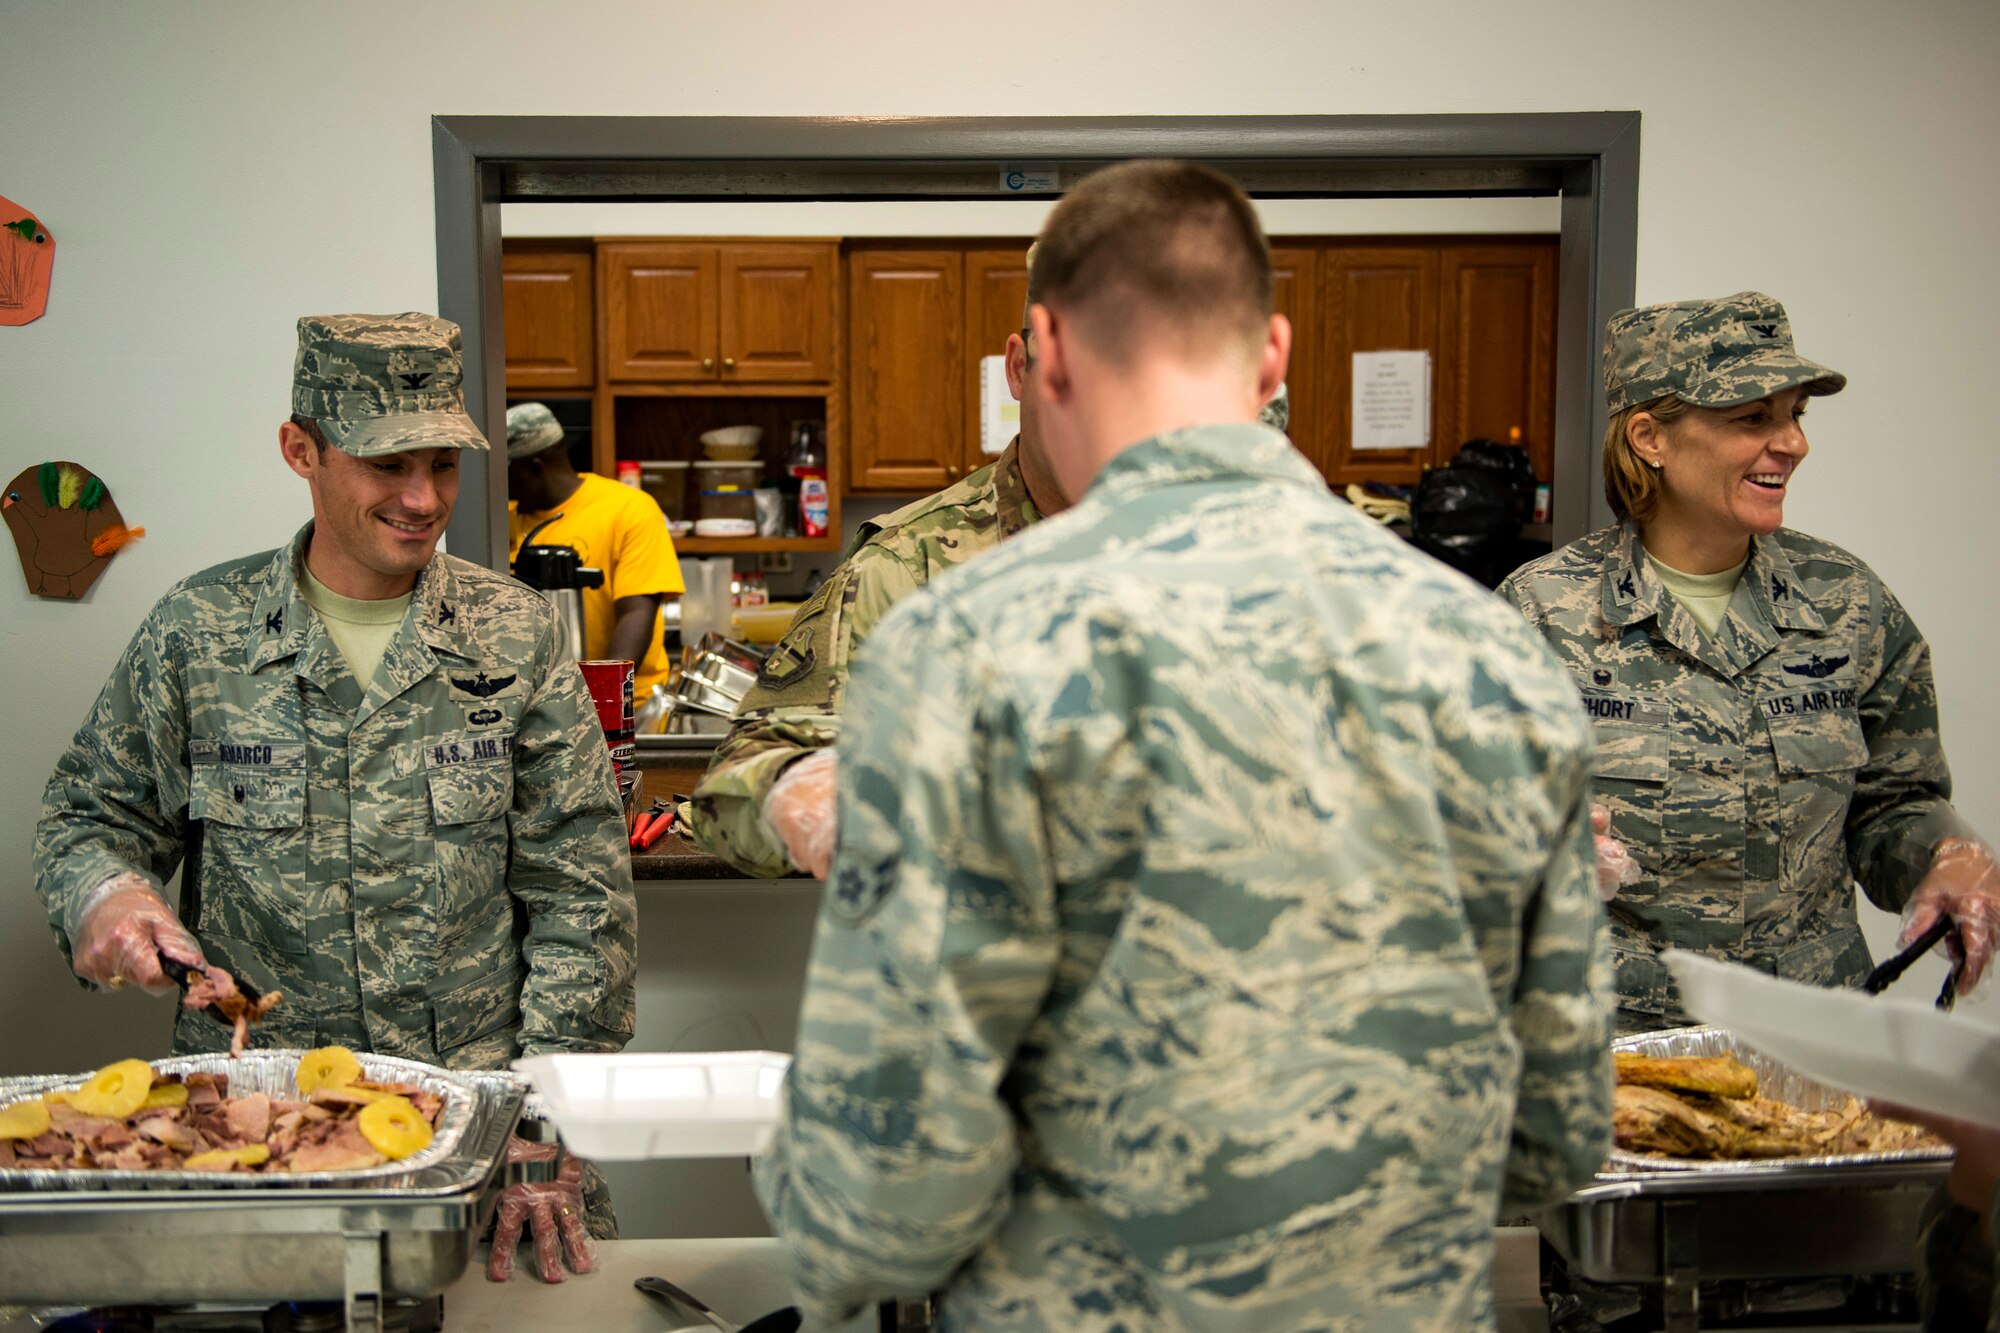 Team Moody leadership serves food during the Annual Airmen’s Thanksgiving luncheon, Nov. 14, 2017, at Moody Air Force Base, Ga. Moody Chiefs Group, with the support of various base organizations, held the luncheon because many Airmen are unable to return home for Thanksgiving. (U.S. Air Force photo by Airman 1st Class Erick Requadt)